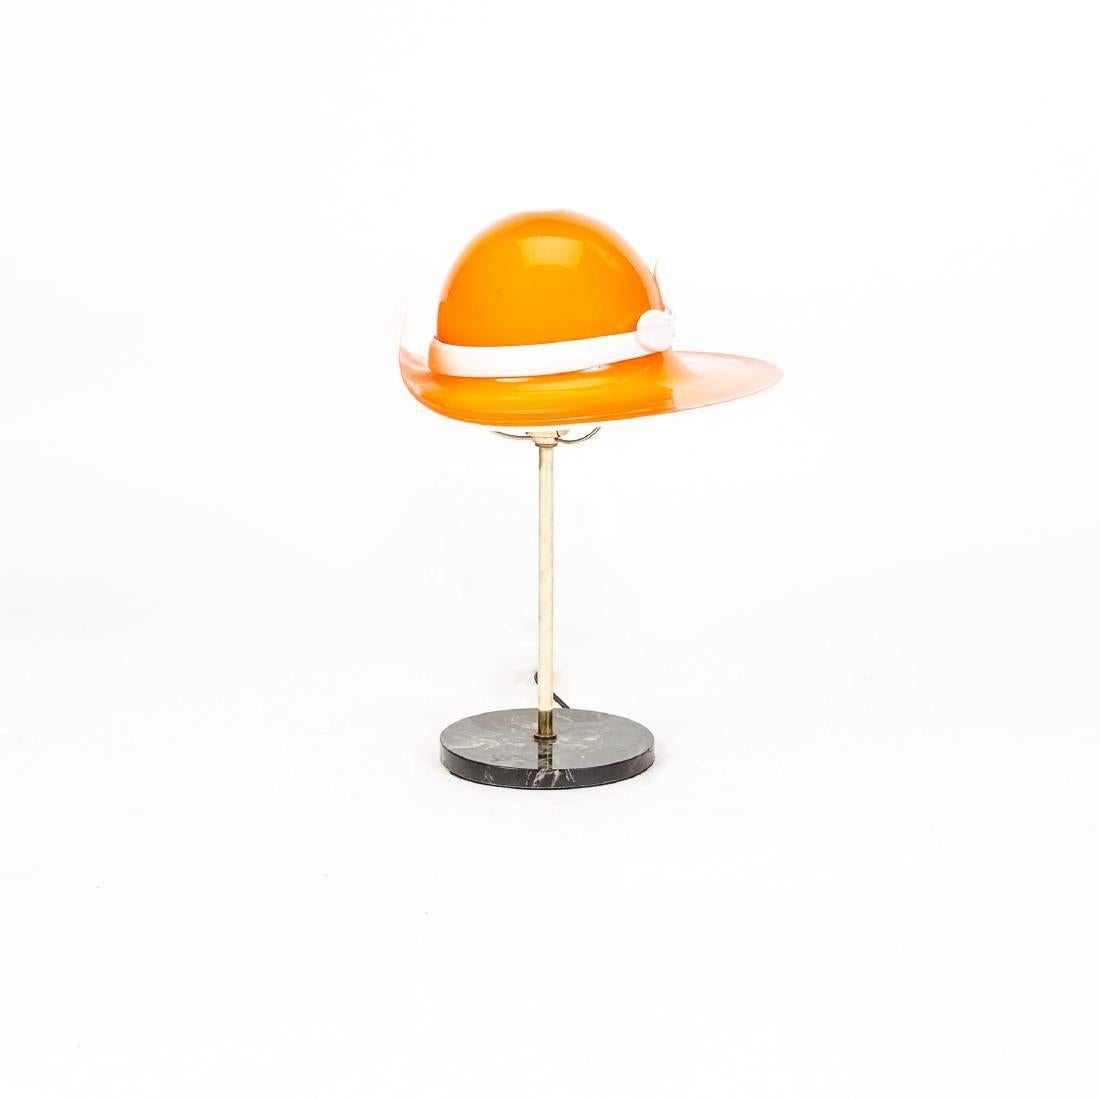 A charming table lamp whimsically made in the shape of a hat in orange Murano glass.

Base: 7'' L x 7'' W